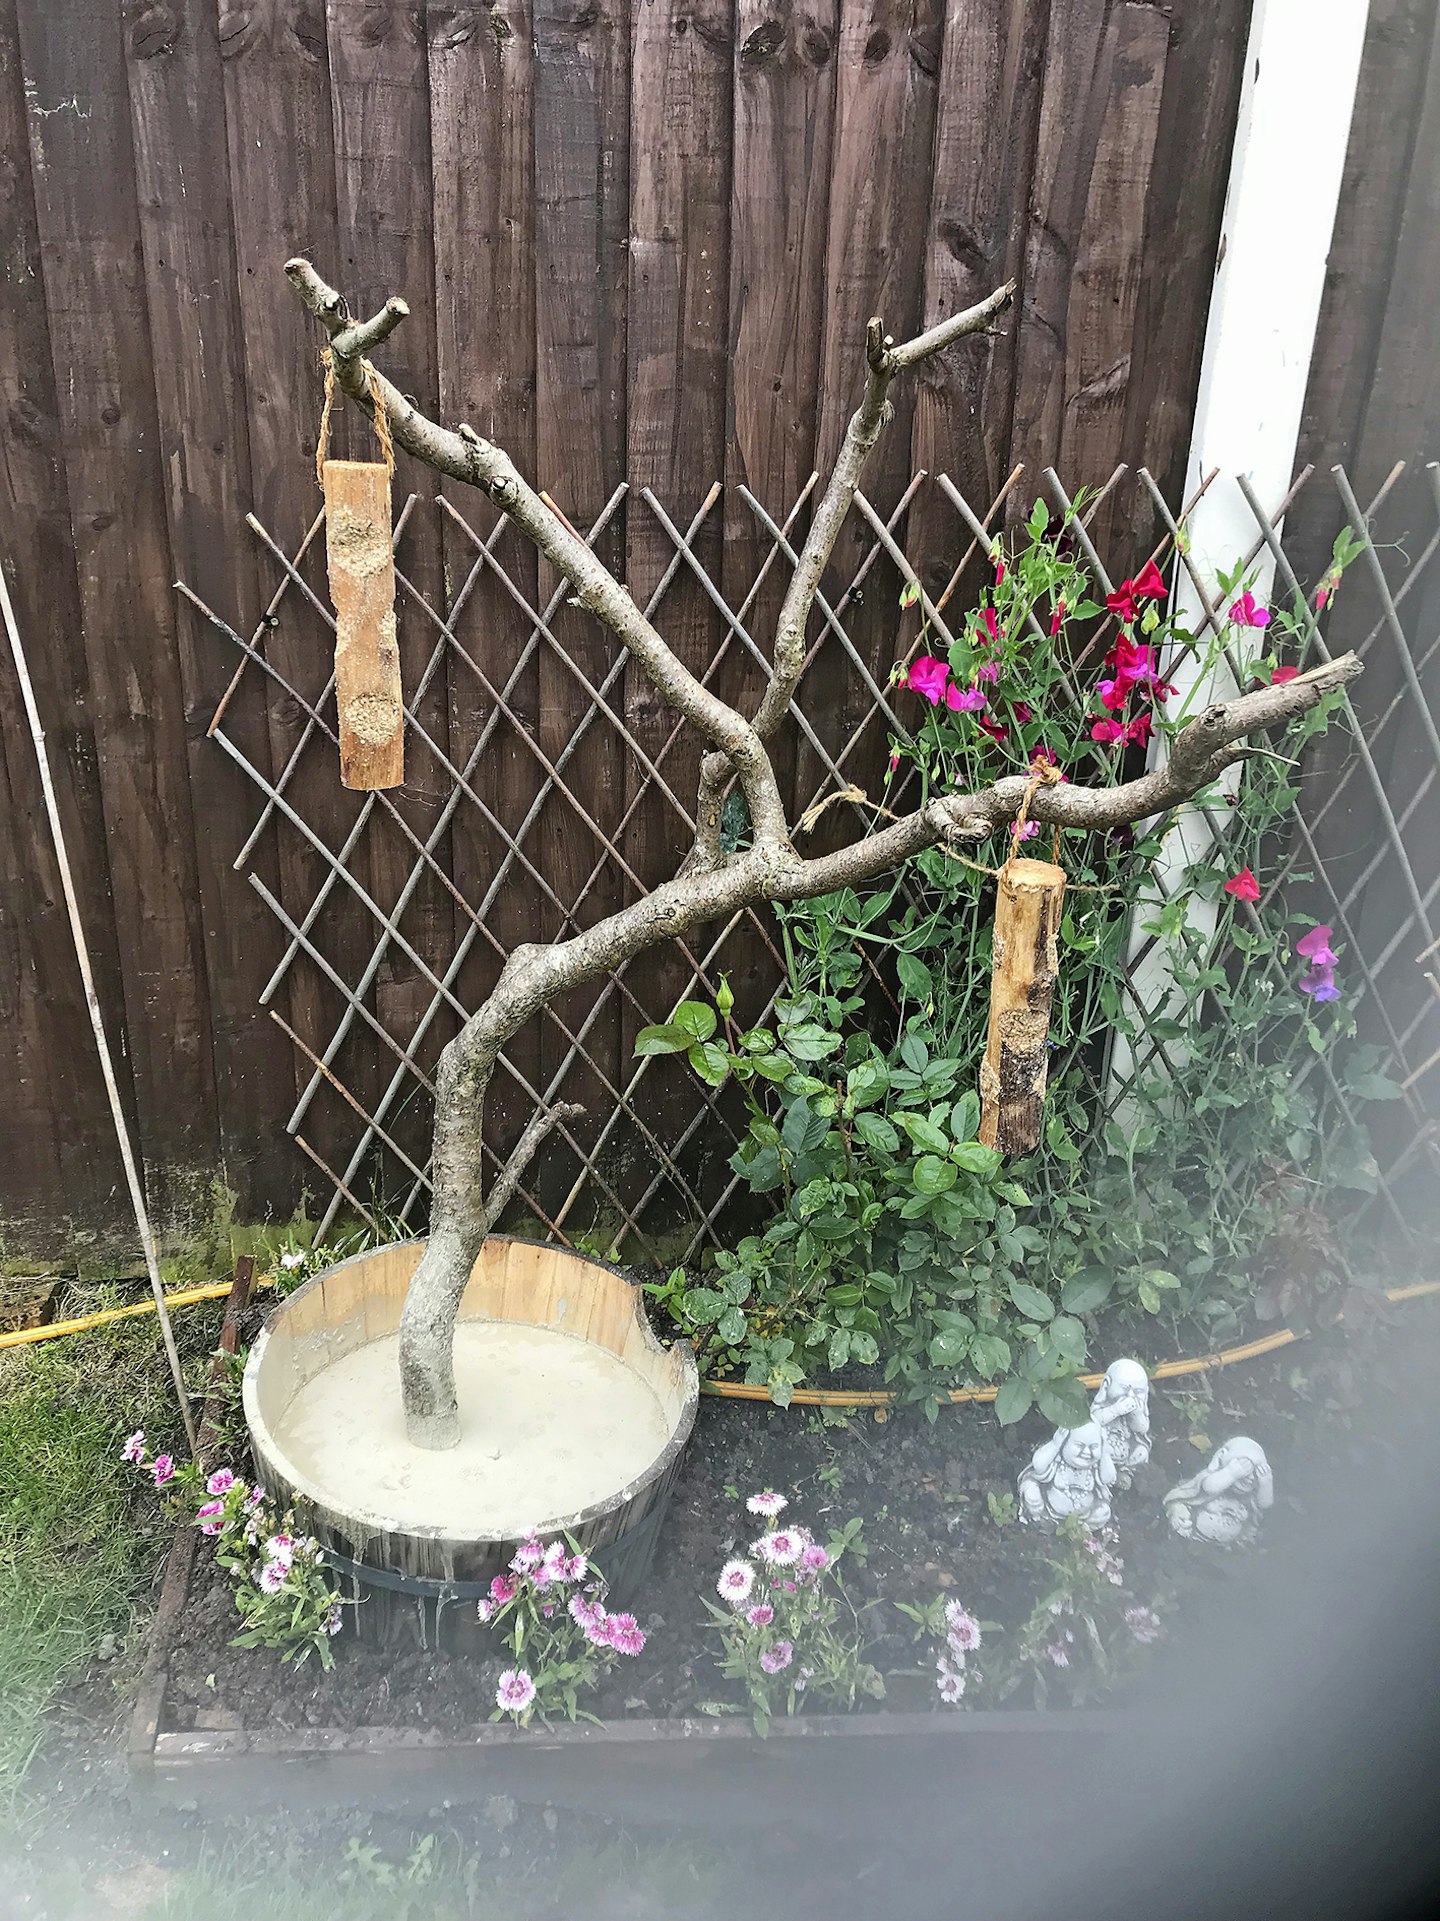 Branch craft project